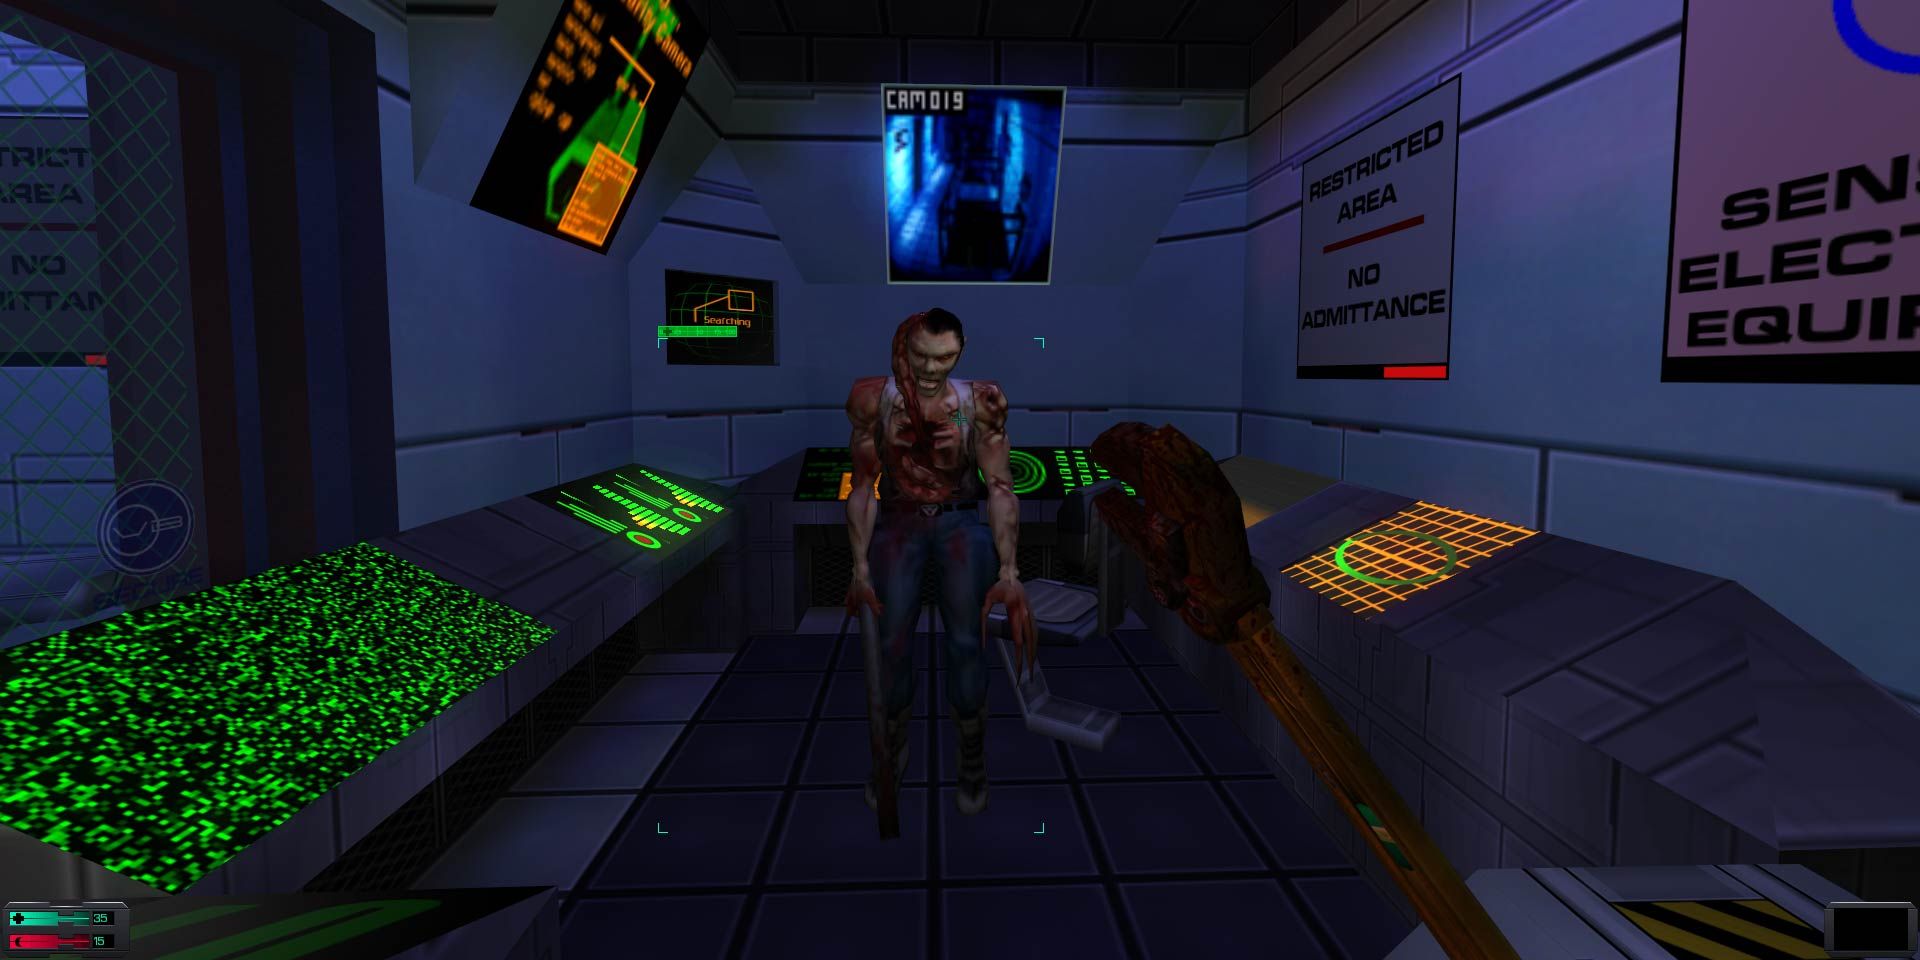 One of The Many from System Shock 2, about to get bashed by a wrench.